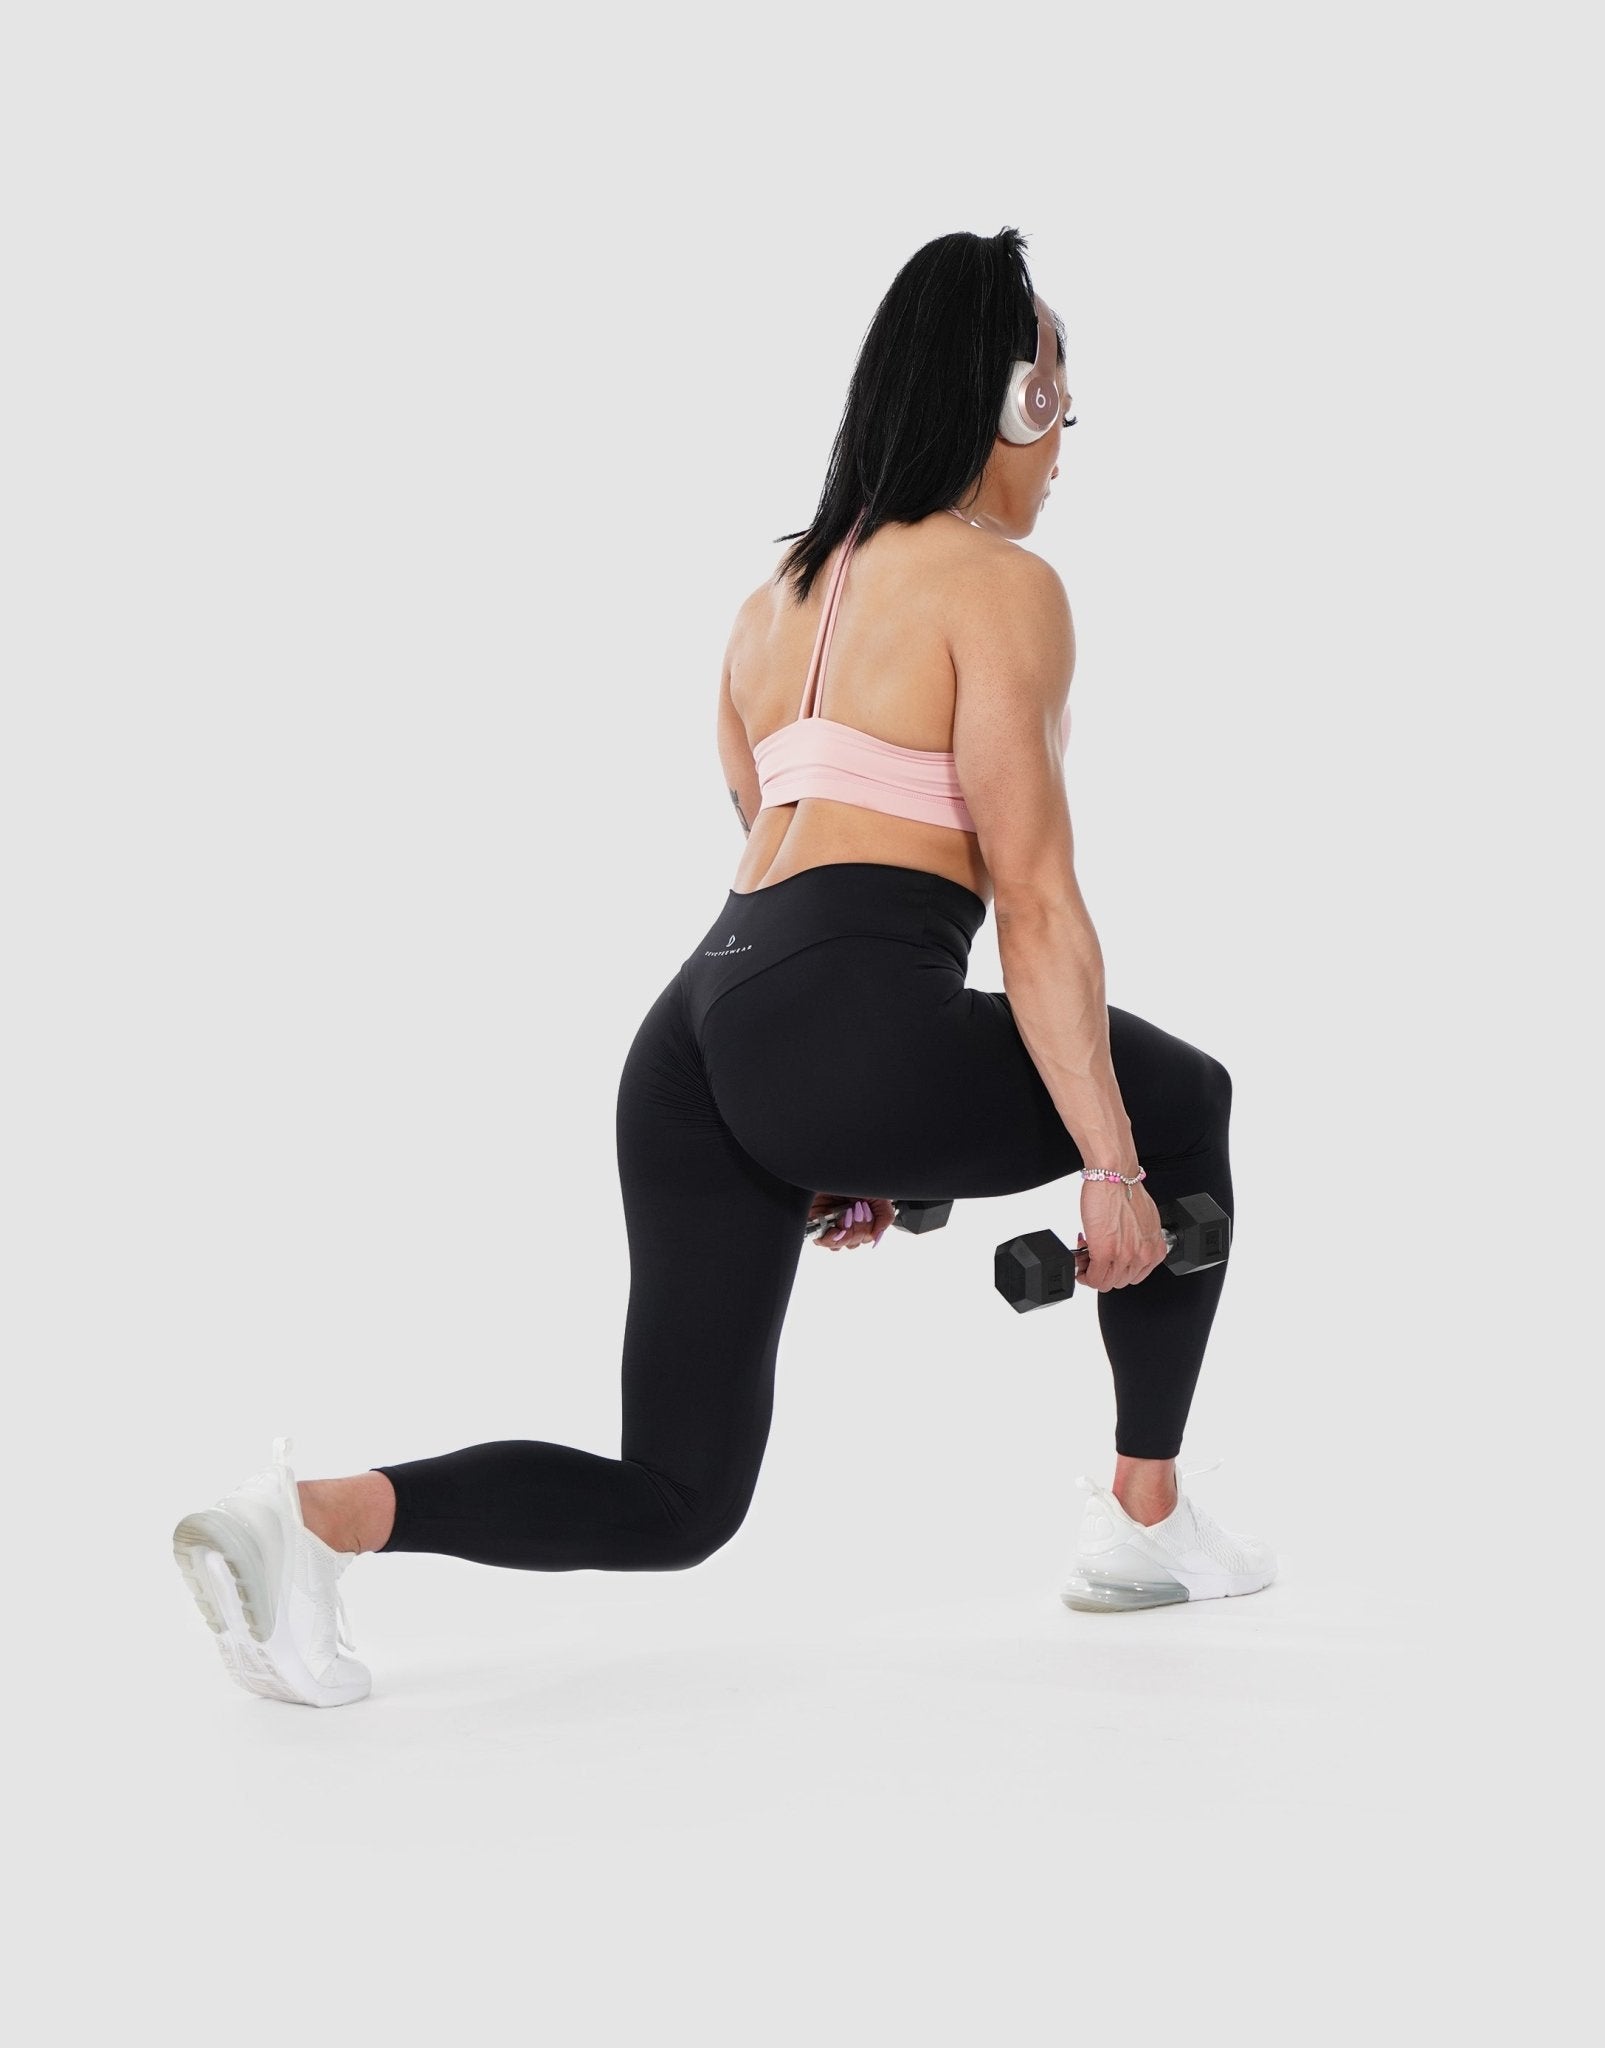 These @Enerbloom creme leggings are absolutely everything! #gabriellav